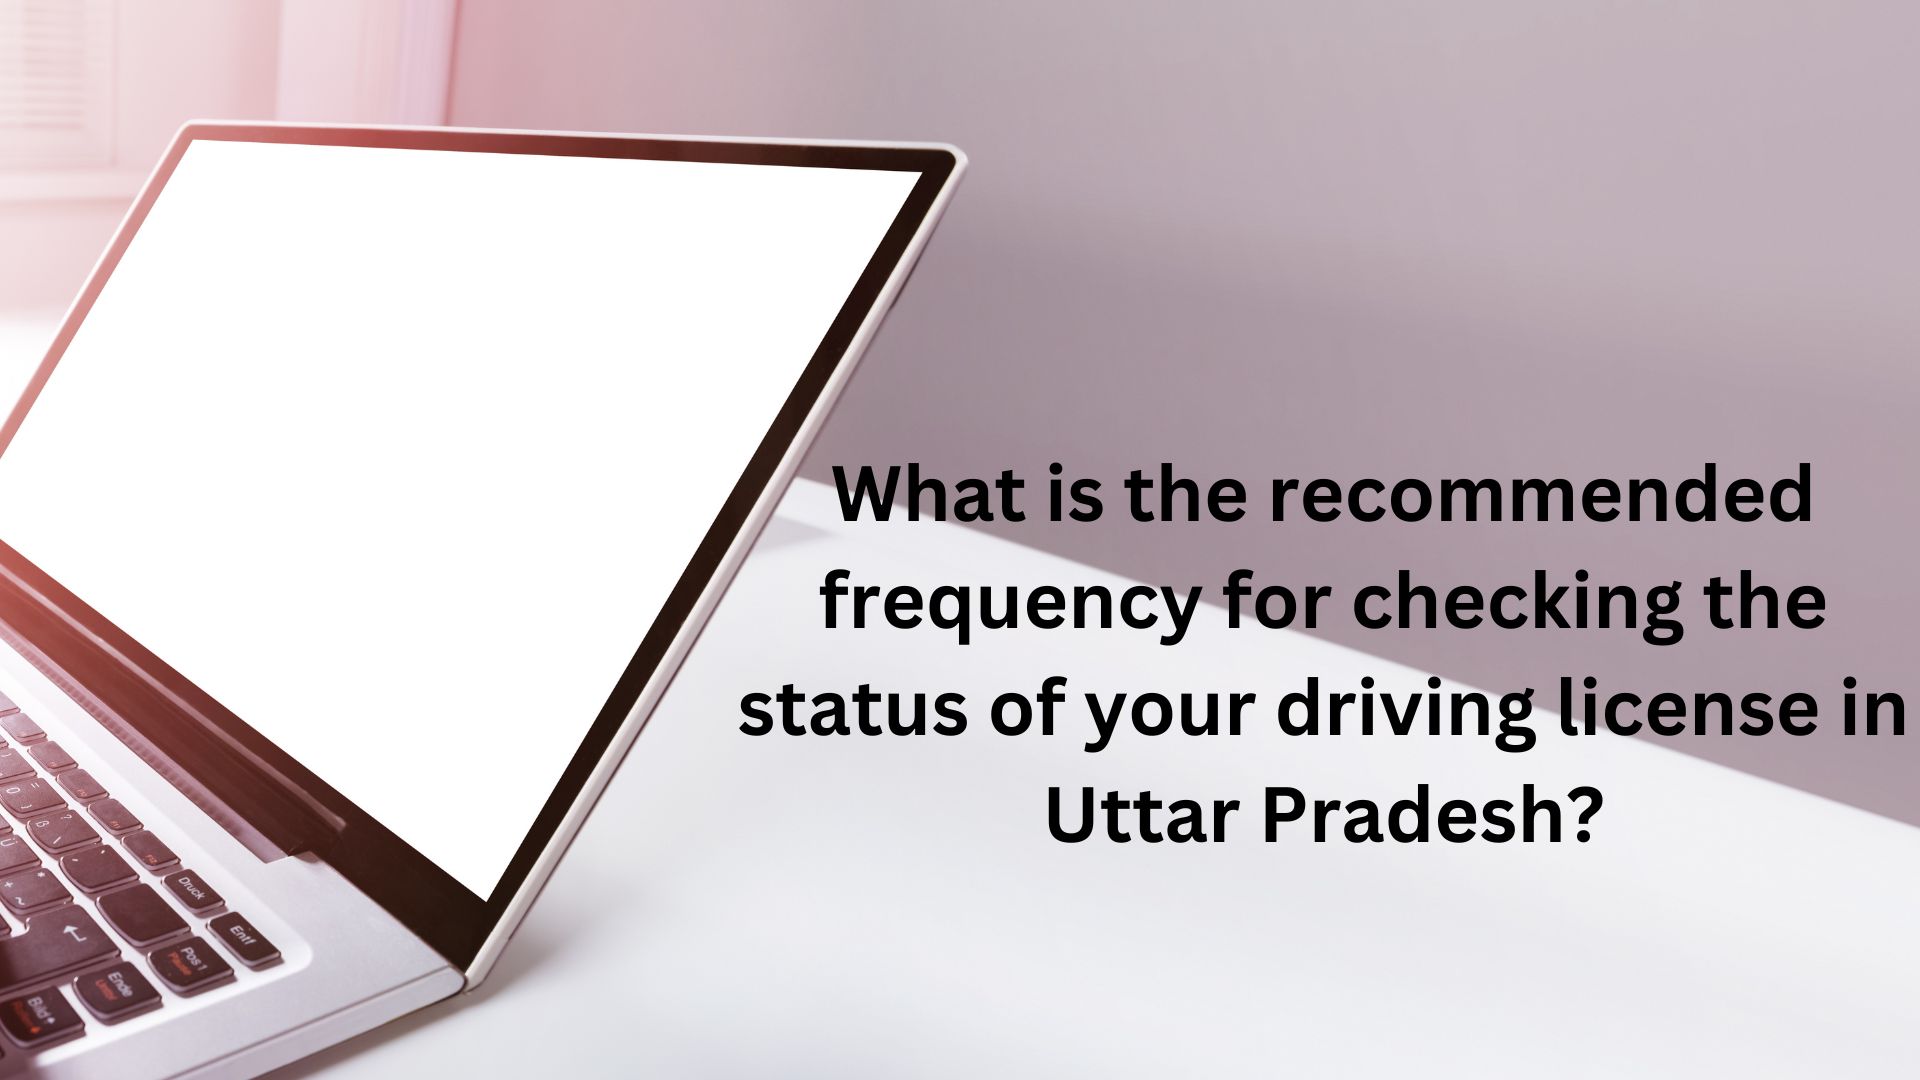 What is the recommended frequency for checking the status of your driving license in Uttar Pradesh